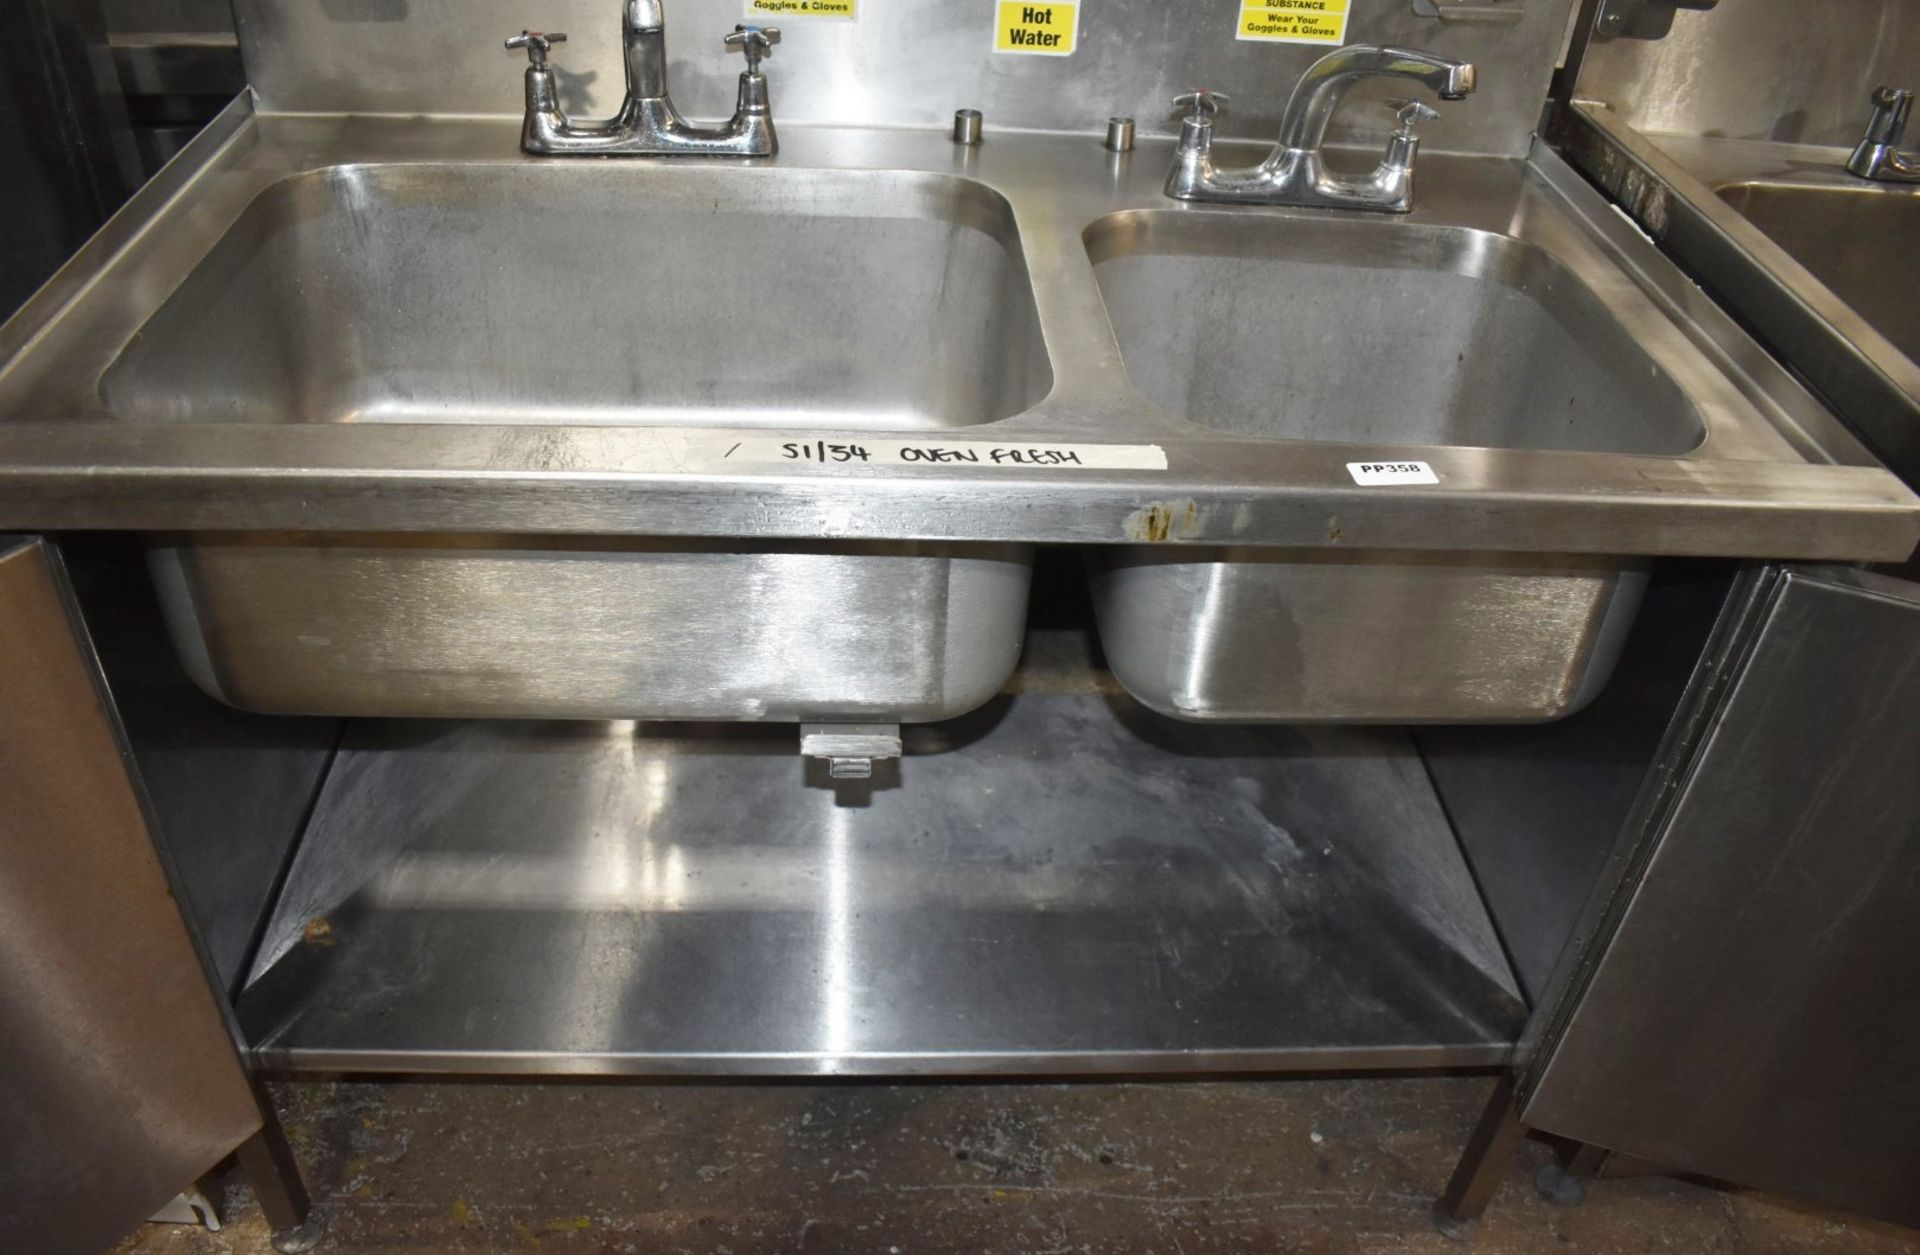 1 x Commercial Kitchen Wash Station With Two Large Sink Bowls, Mixer Taps, Overhead Drying Rack - Image 8 of 9